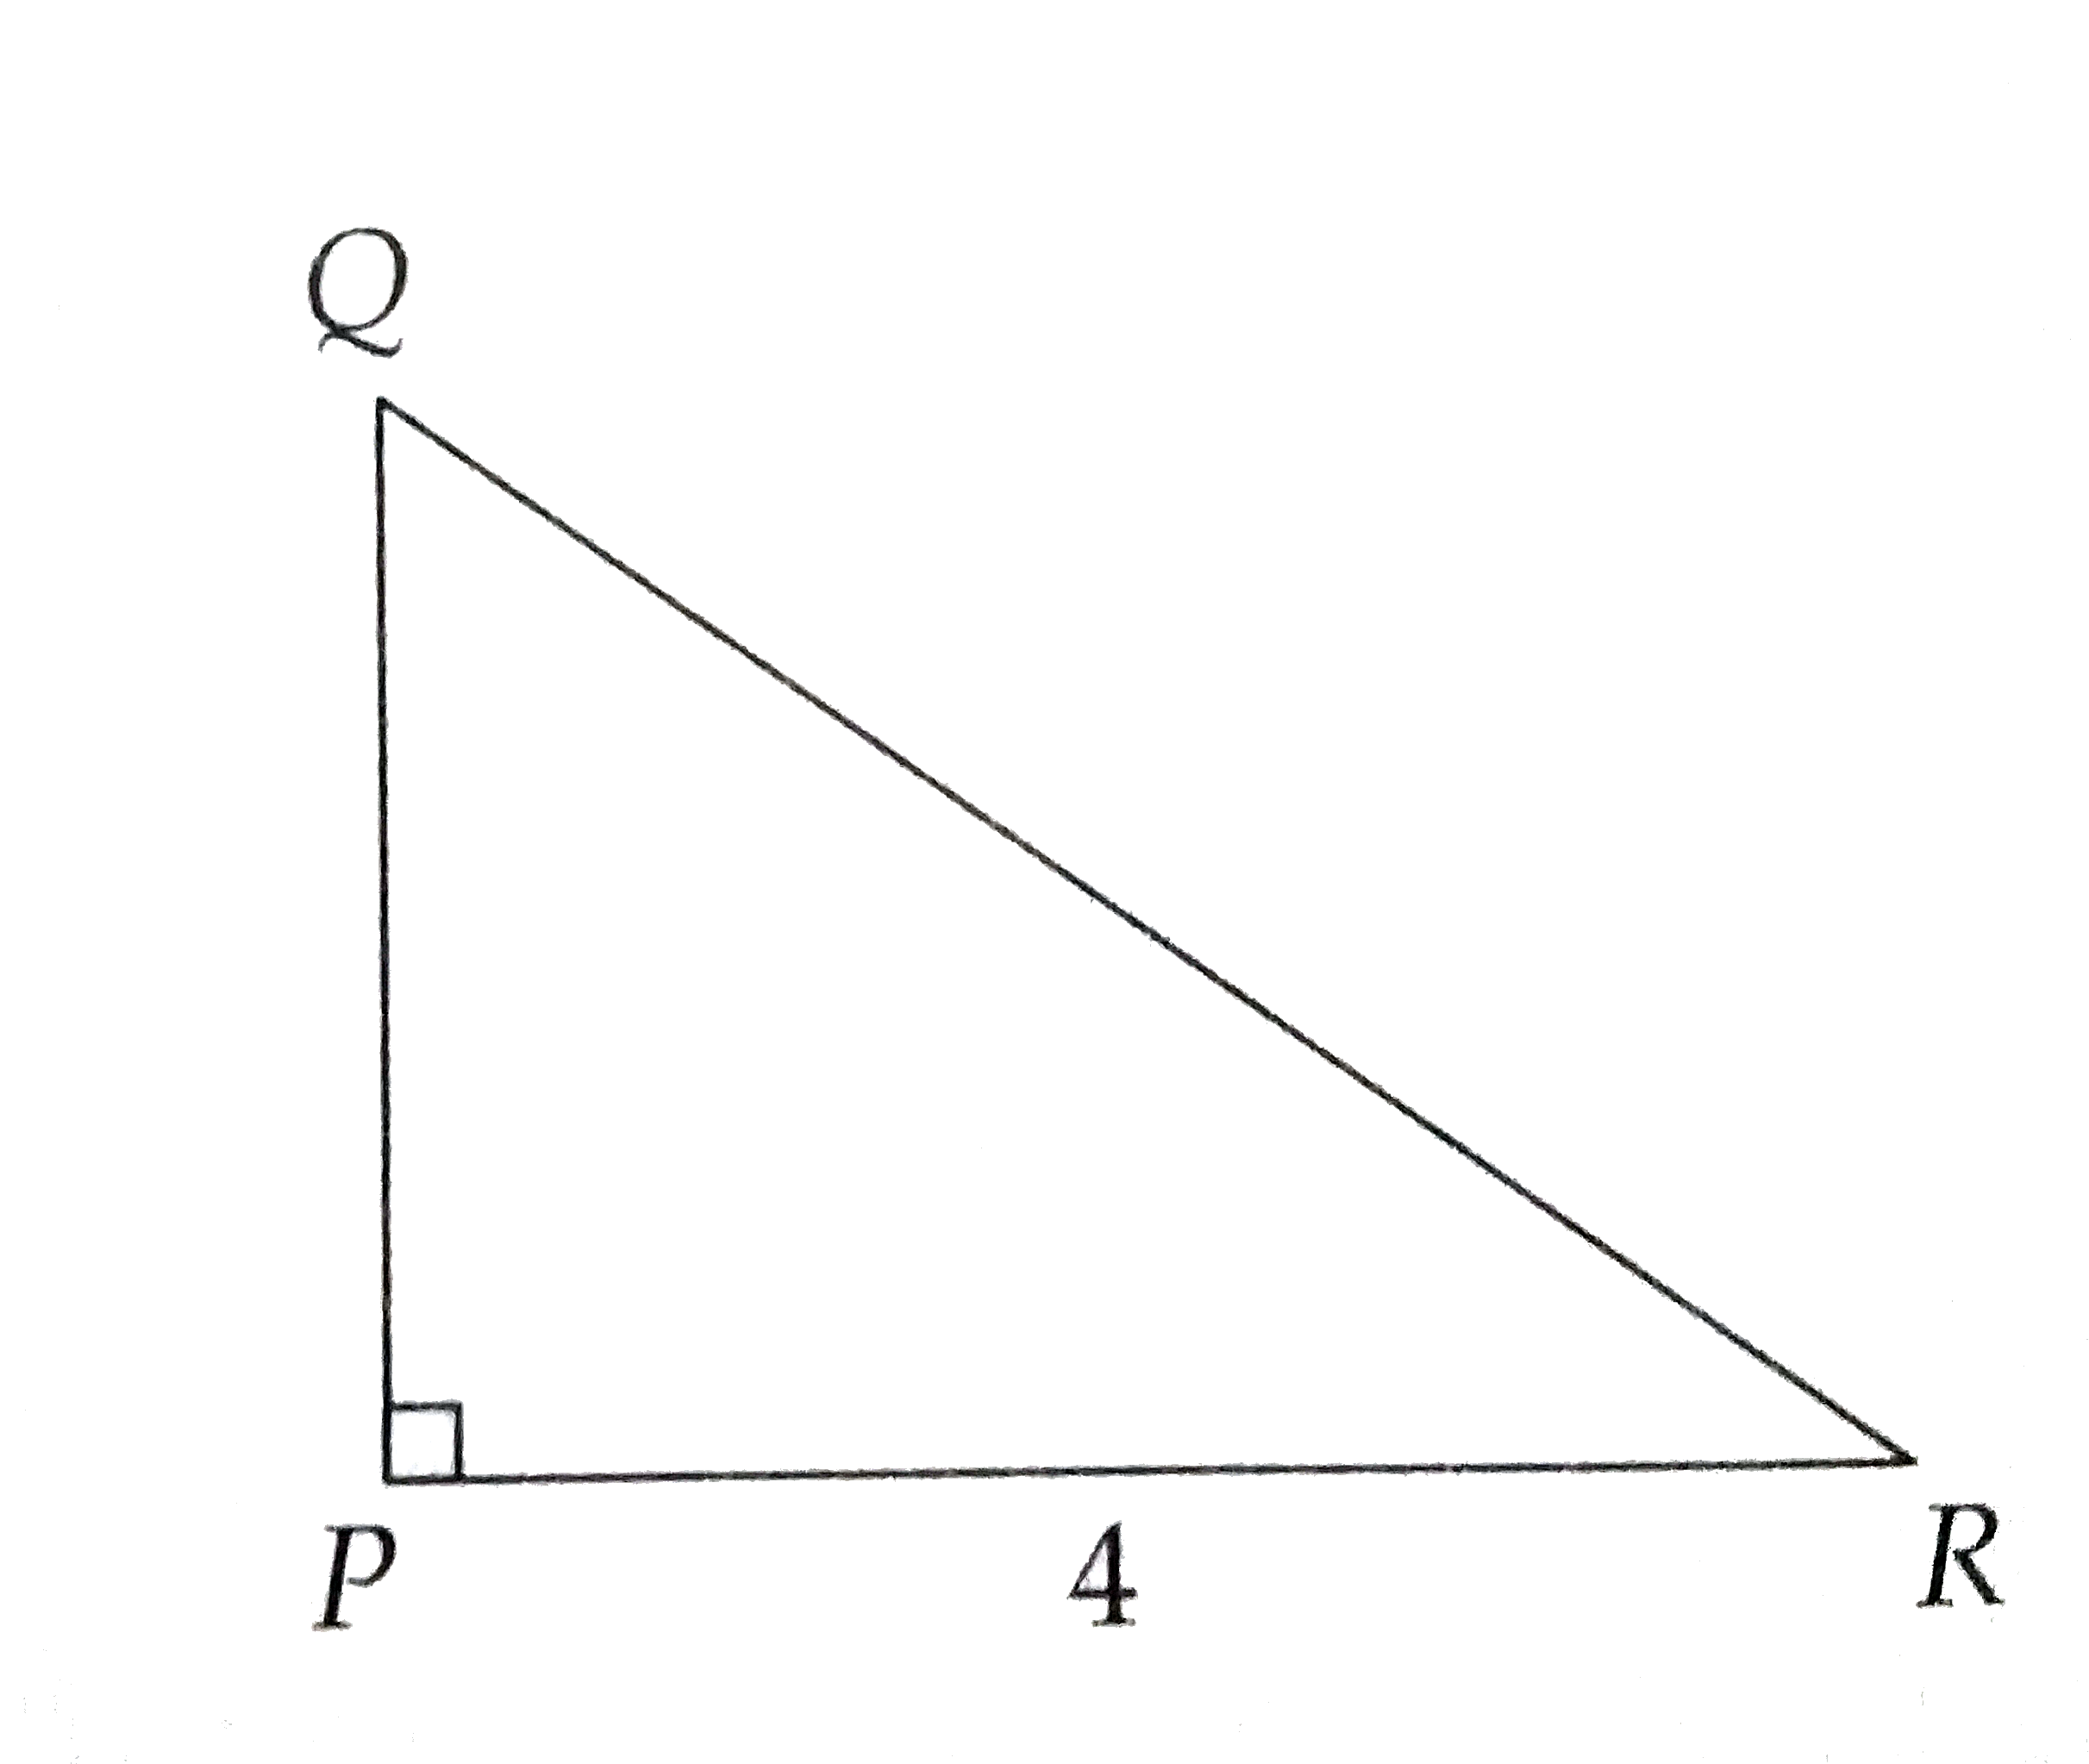 The measure of angle angle QPR is 90 degrees, and the area of triangle PQR is 6. If triangle PQR is rotated 360^(@) about side  PR, what is the total surface area of the resulting solid ?